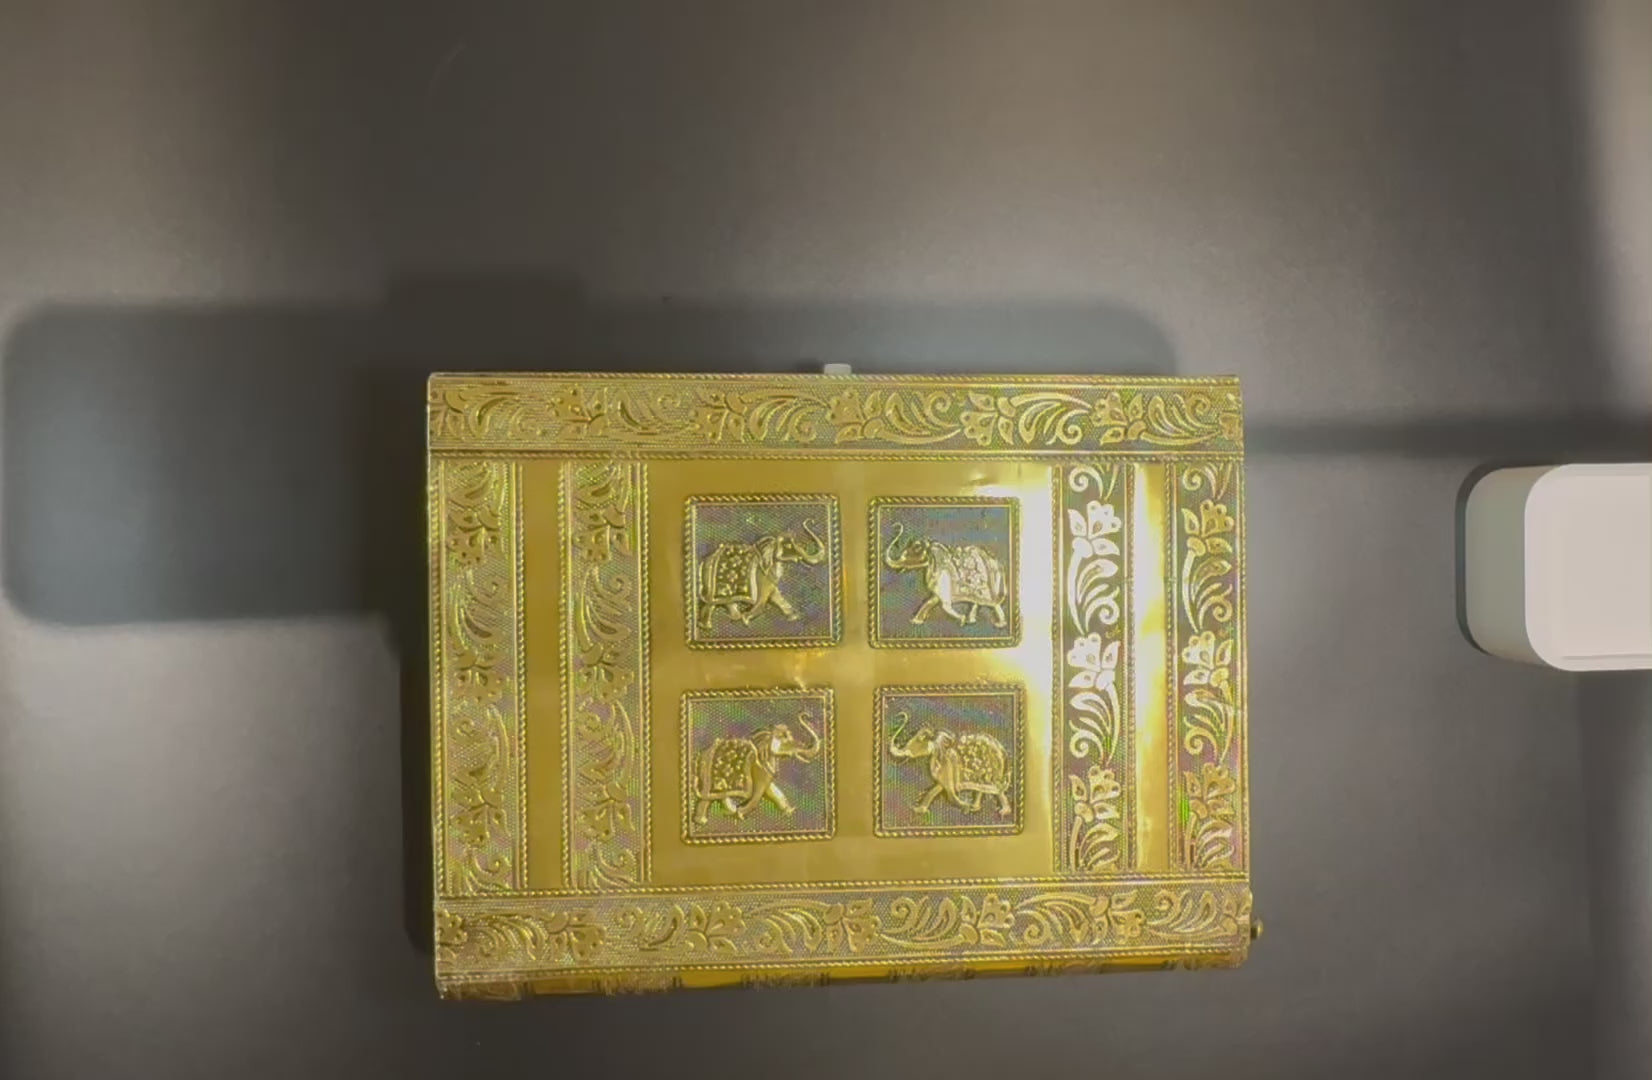 video of opening the gold vintage Indian Jewelry box that shows how the trays fan out and the dowel for bangles is removed. It also shows the latch that closes the box and the edge of the book like design